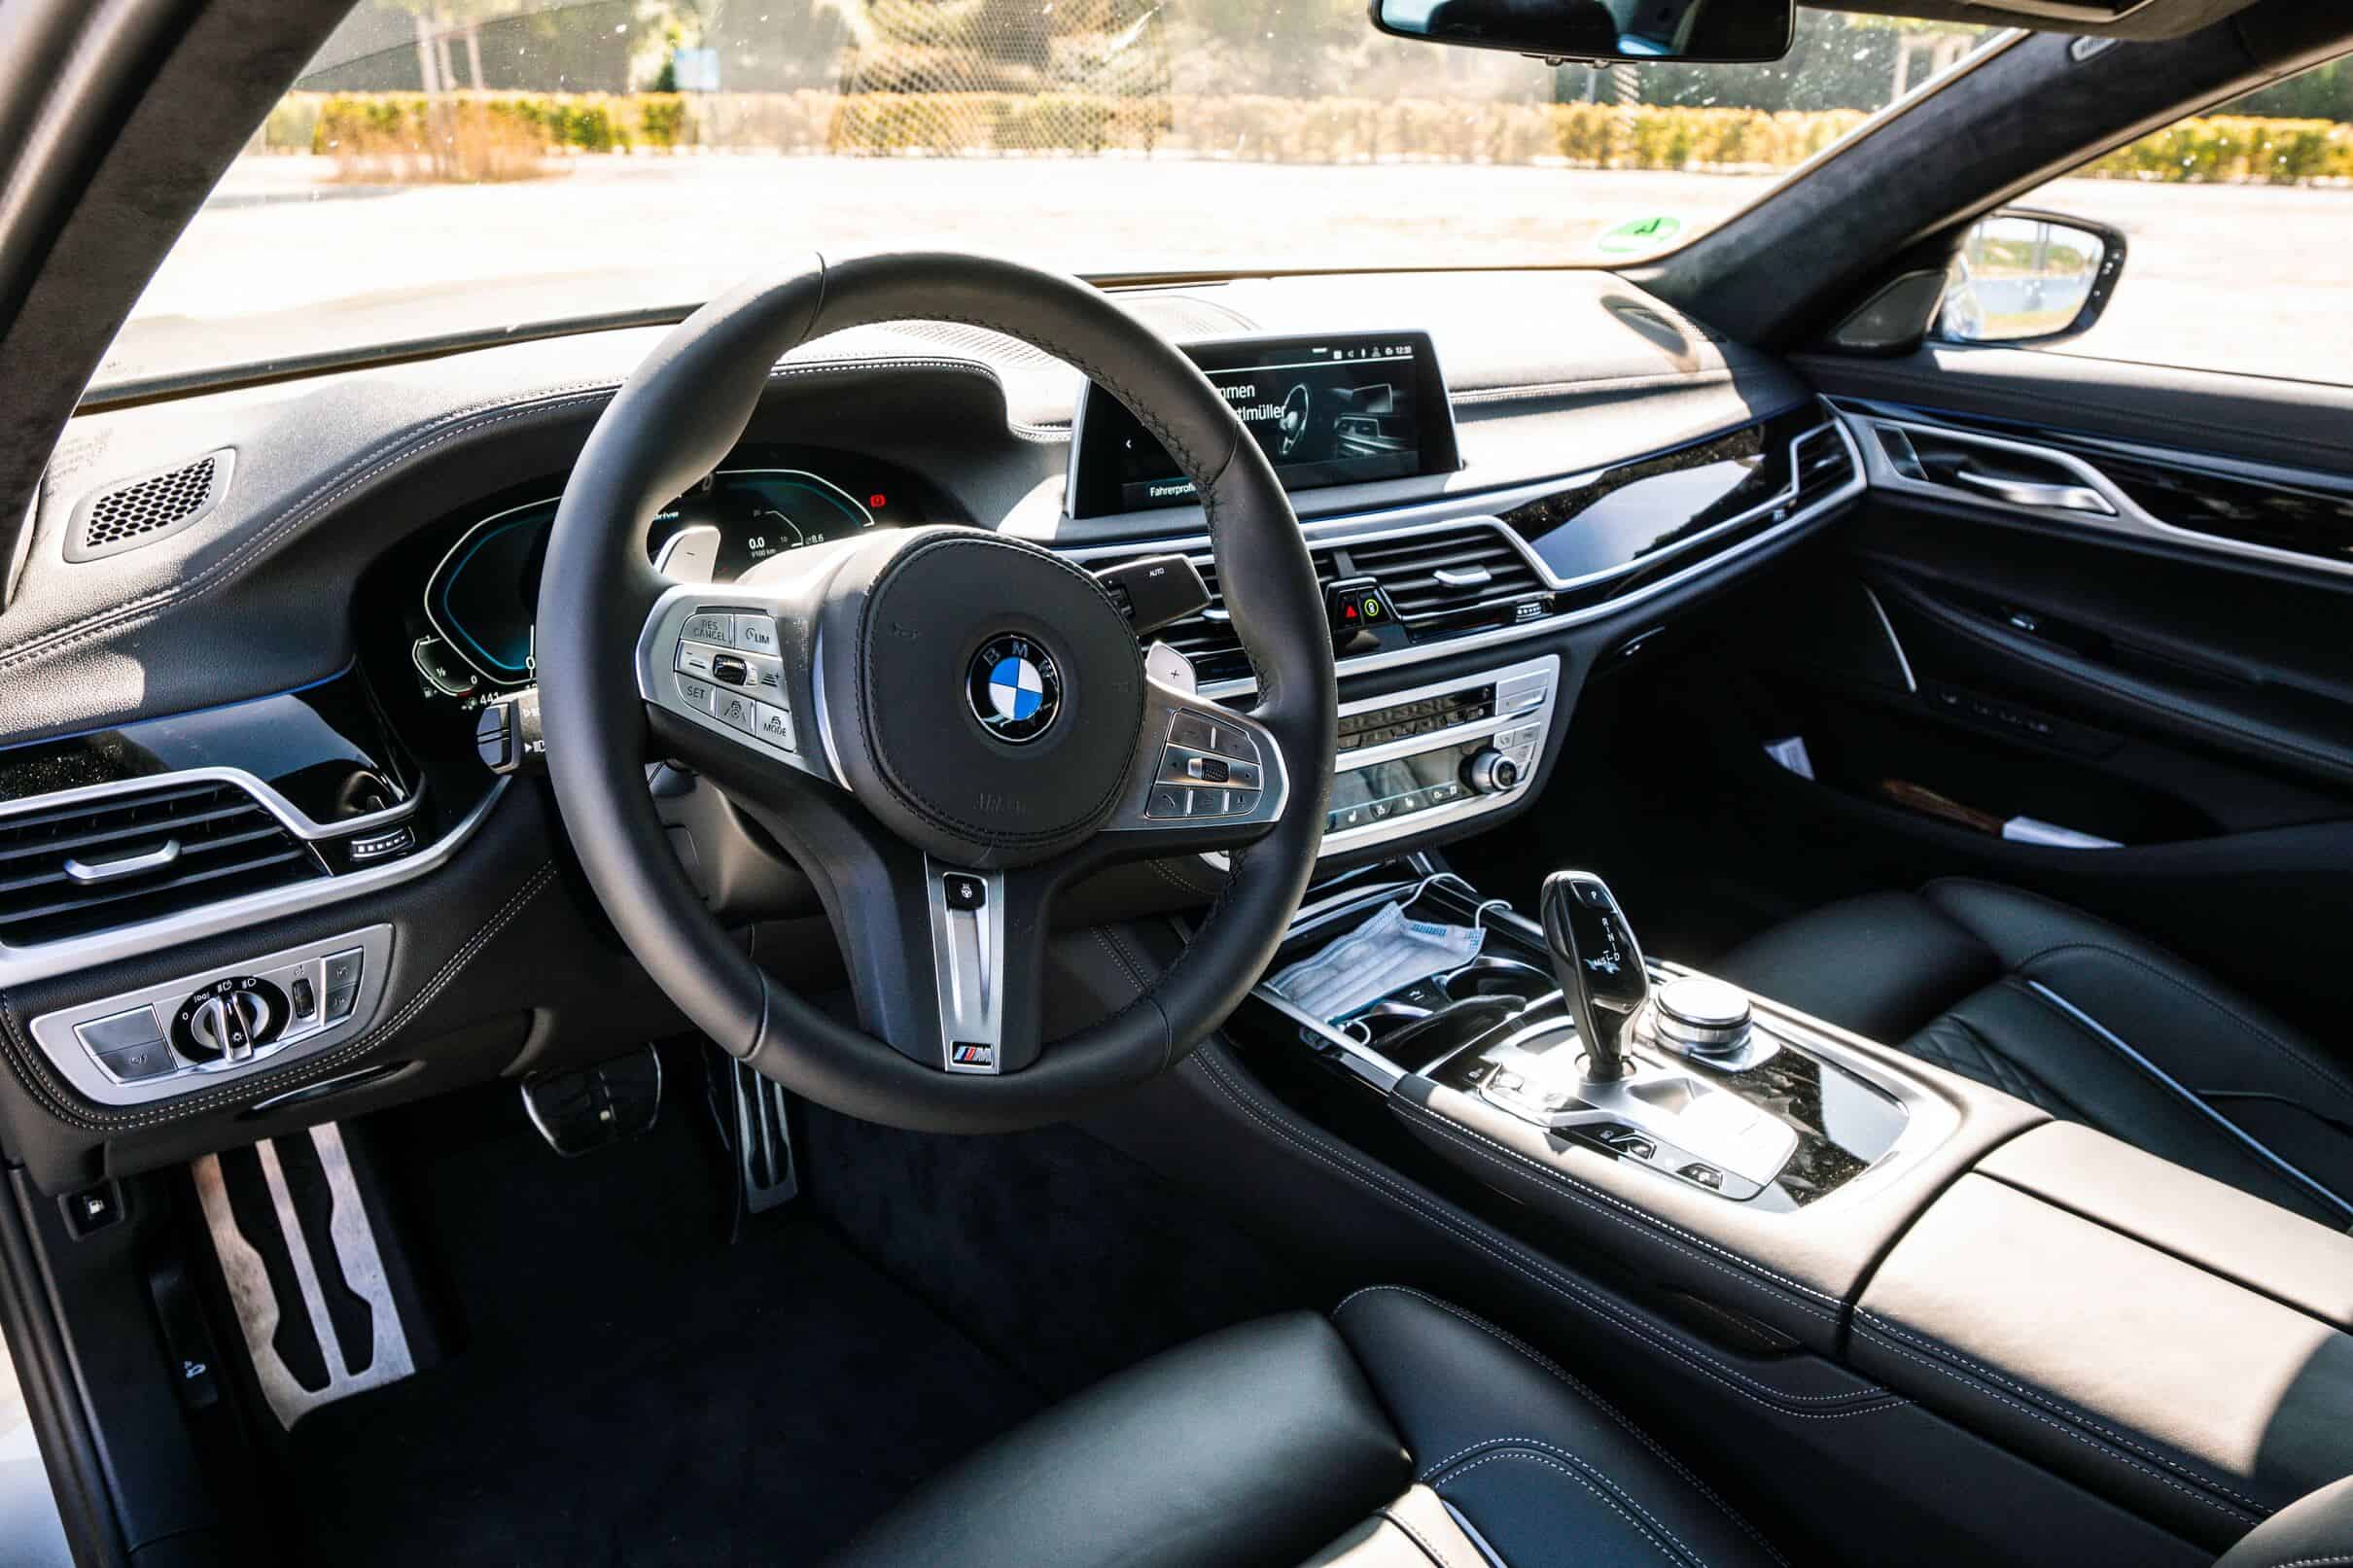 BMW 1 Series Interior: Immerse yourself in luxury and precision with the meticulously crafted details of the BMW 1 Series interior.